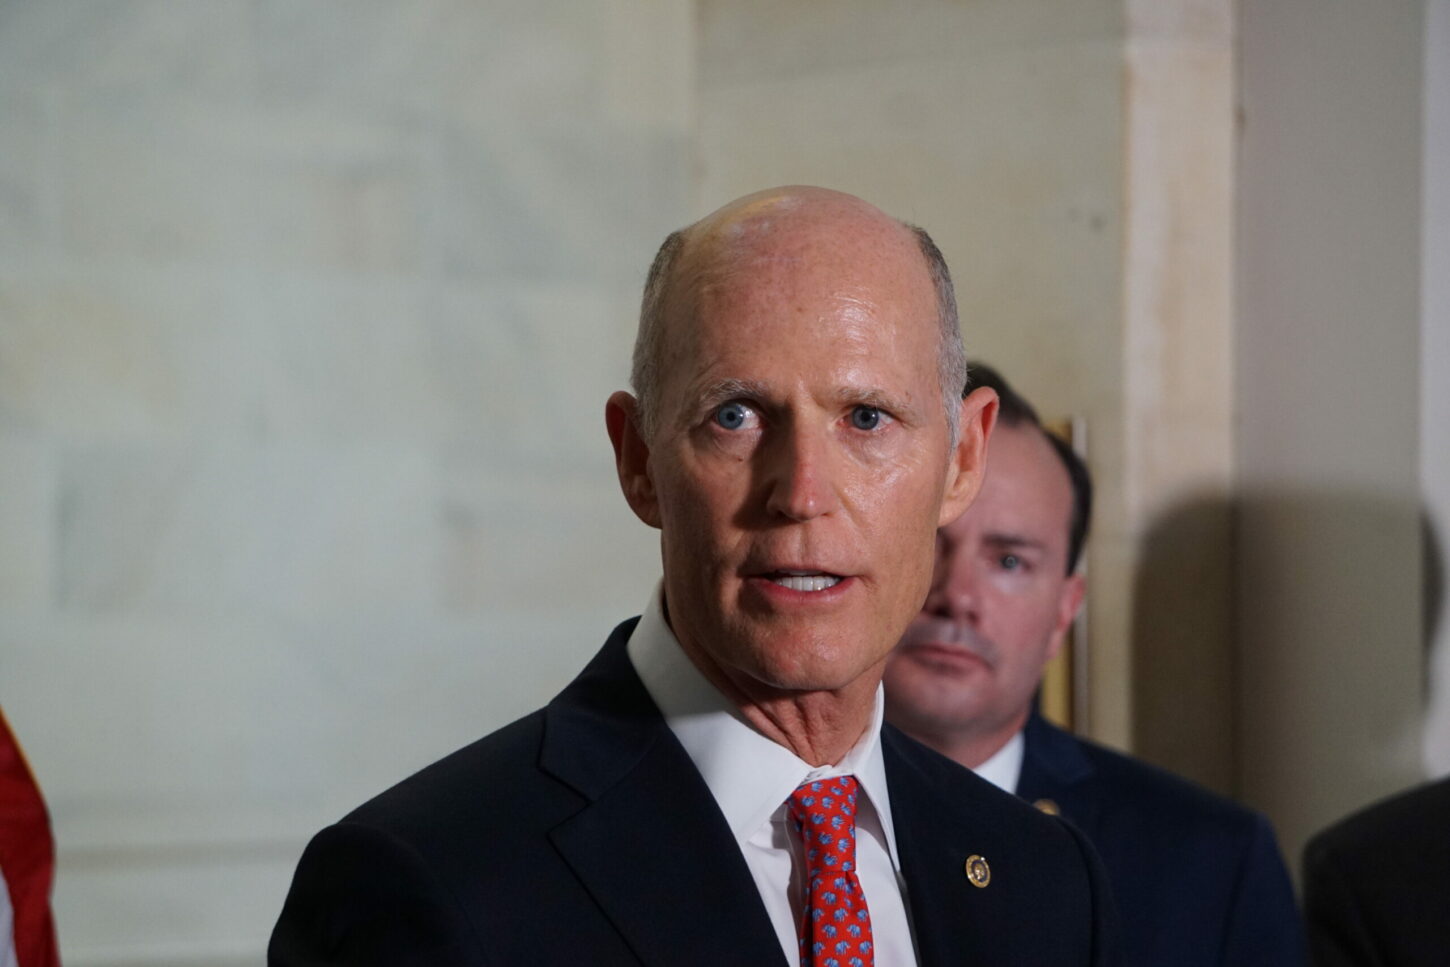 Scott Says Democrats 'Desperate for Power' With Failed Attempt to end Filibuster